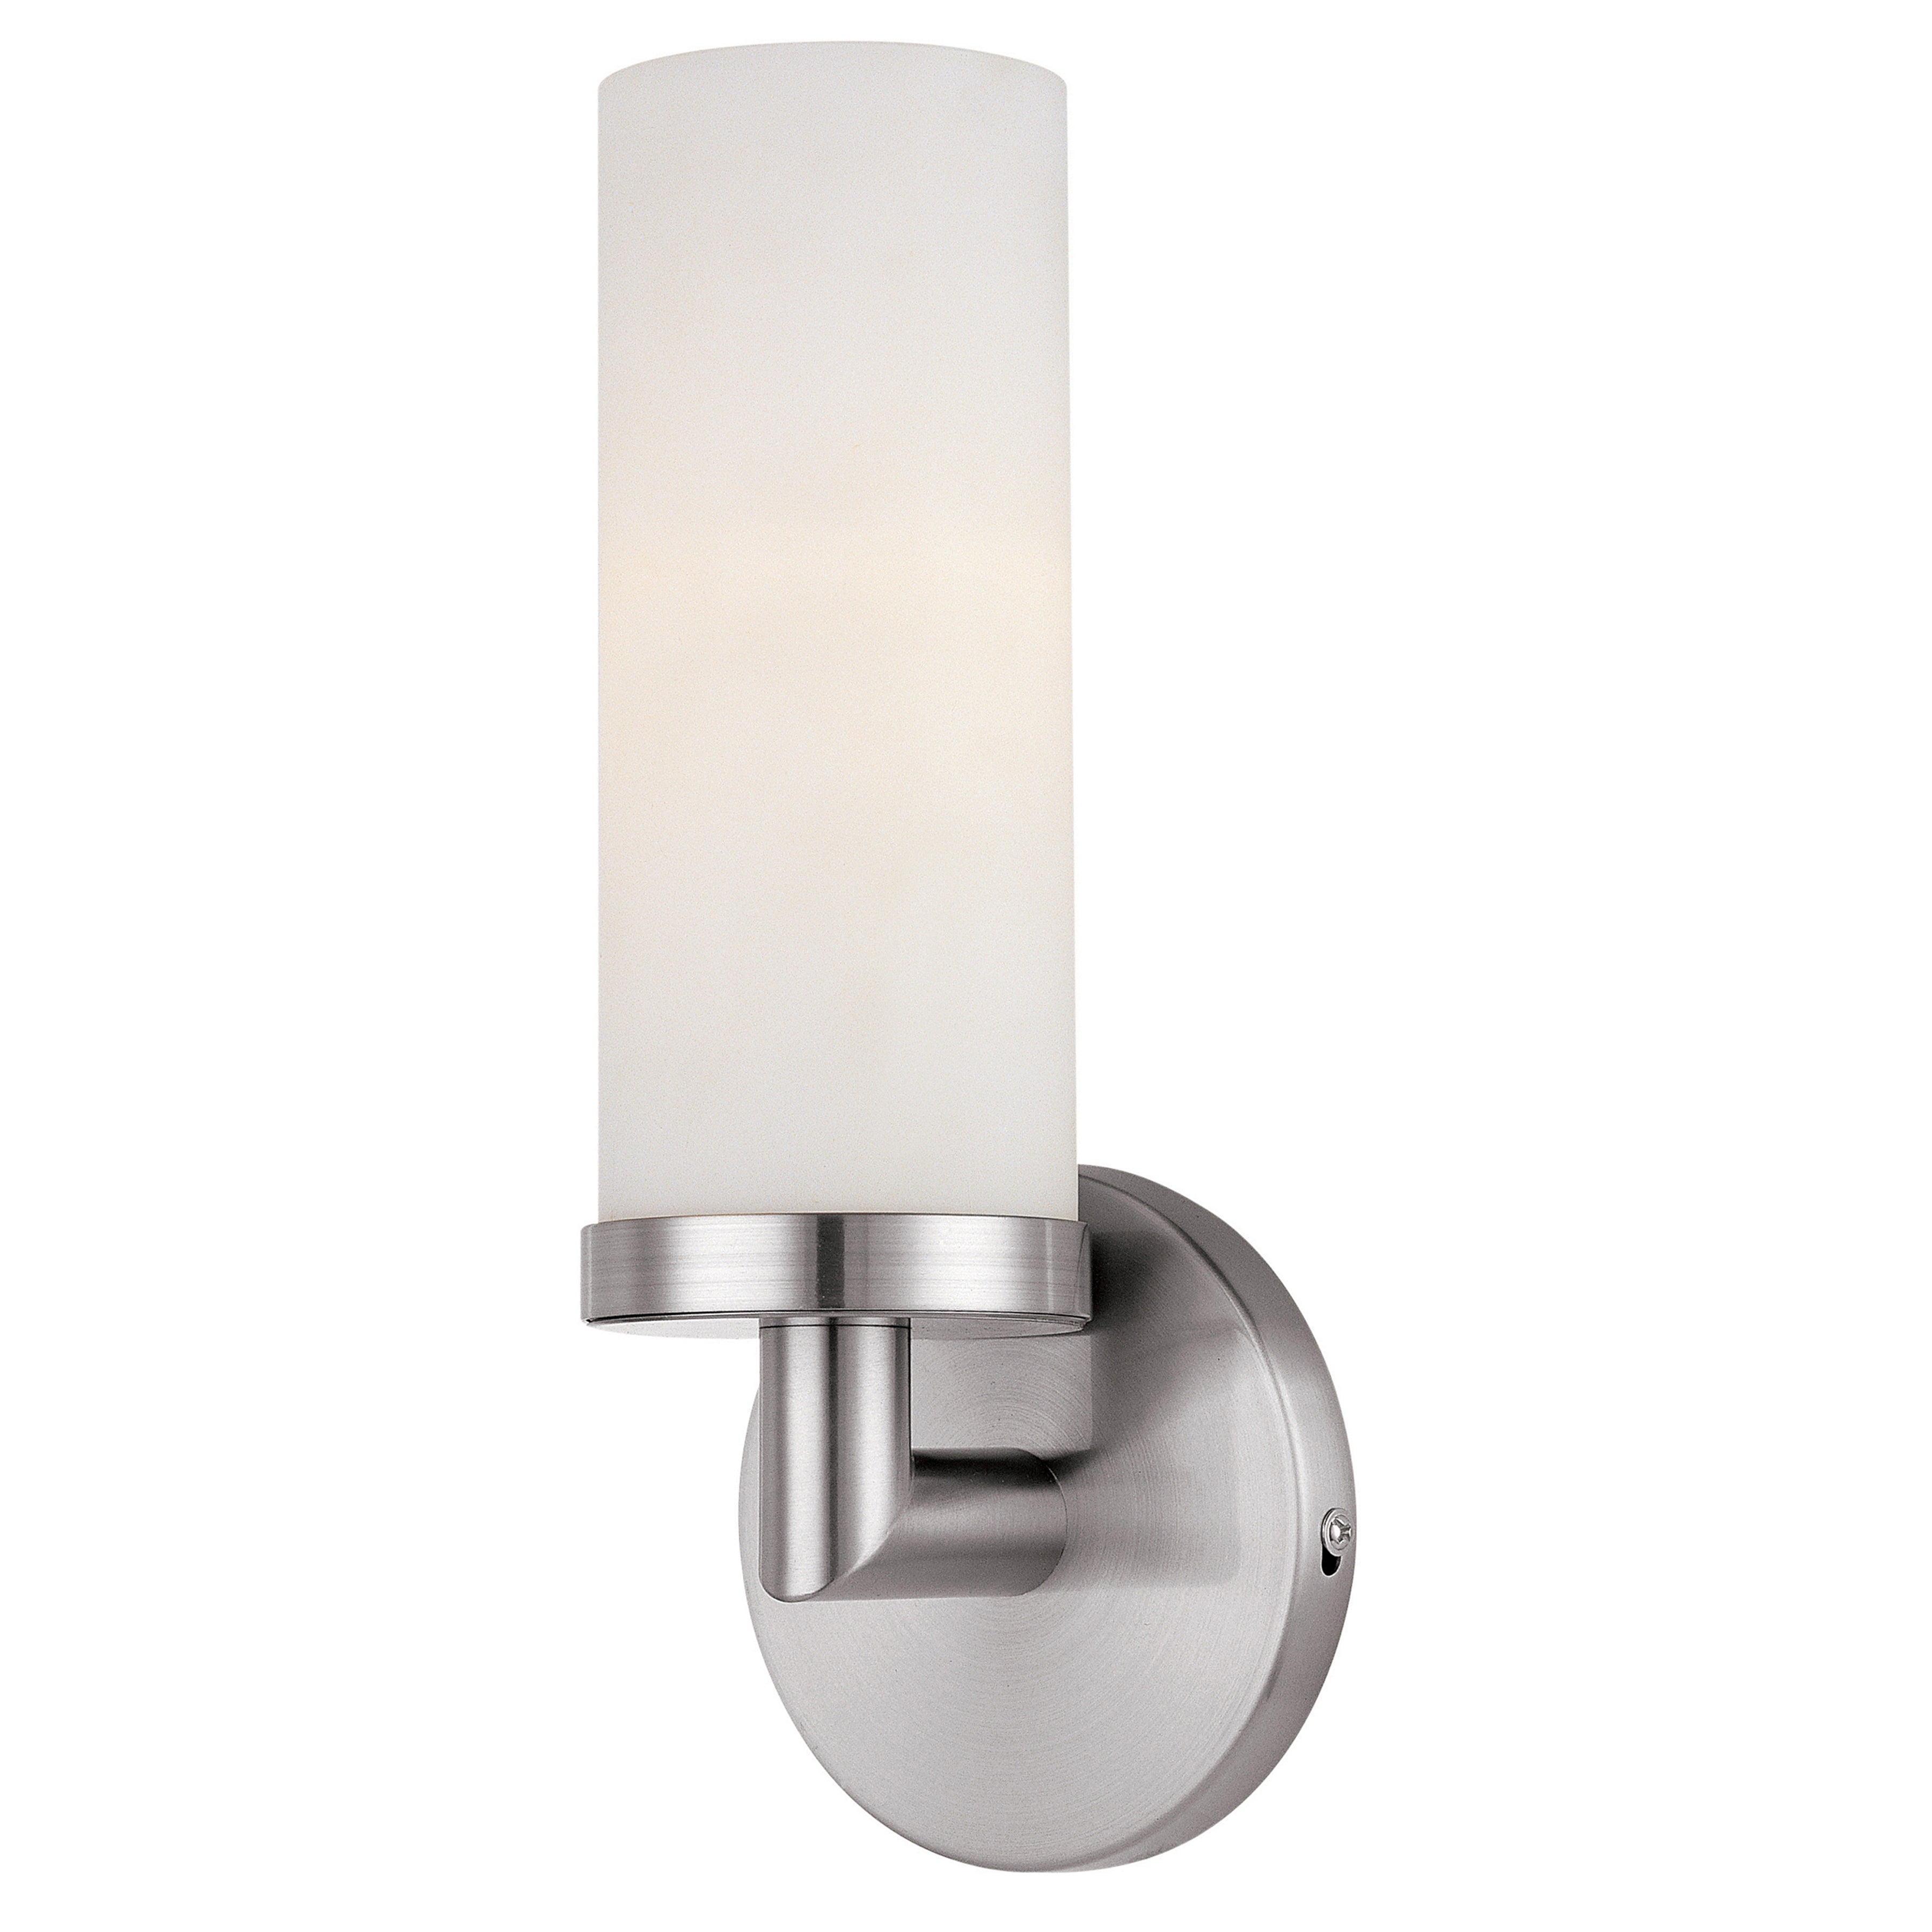 Aqueous LED Wall Sconce Light, Brushed Steel